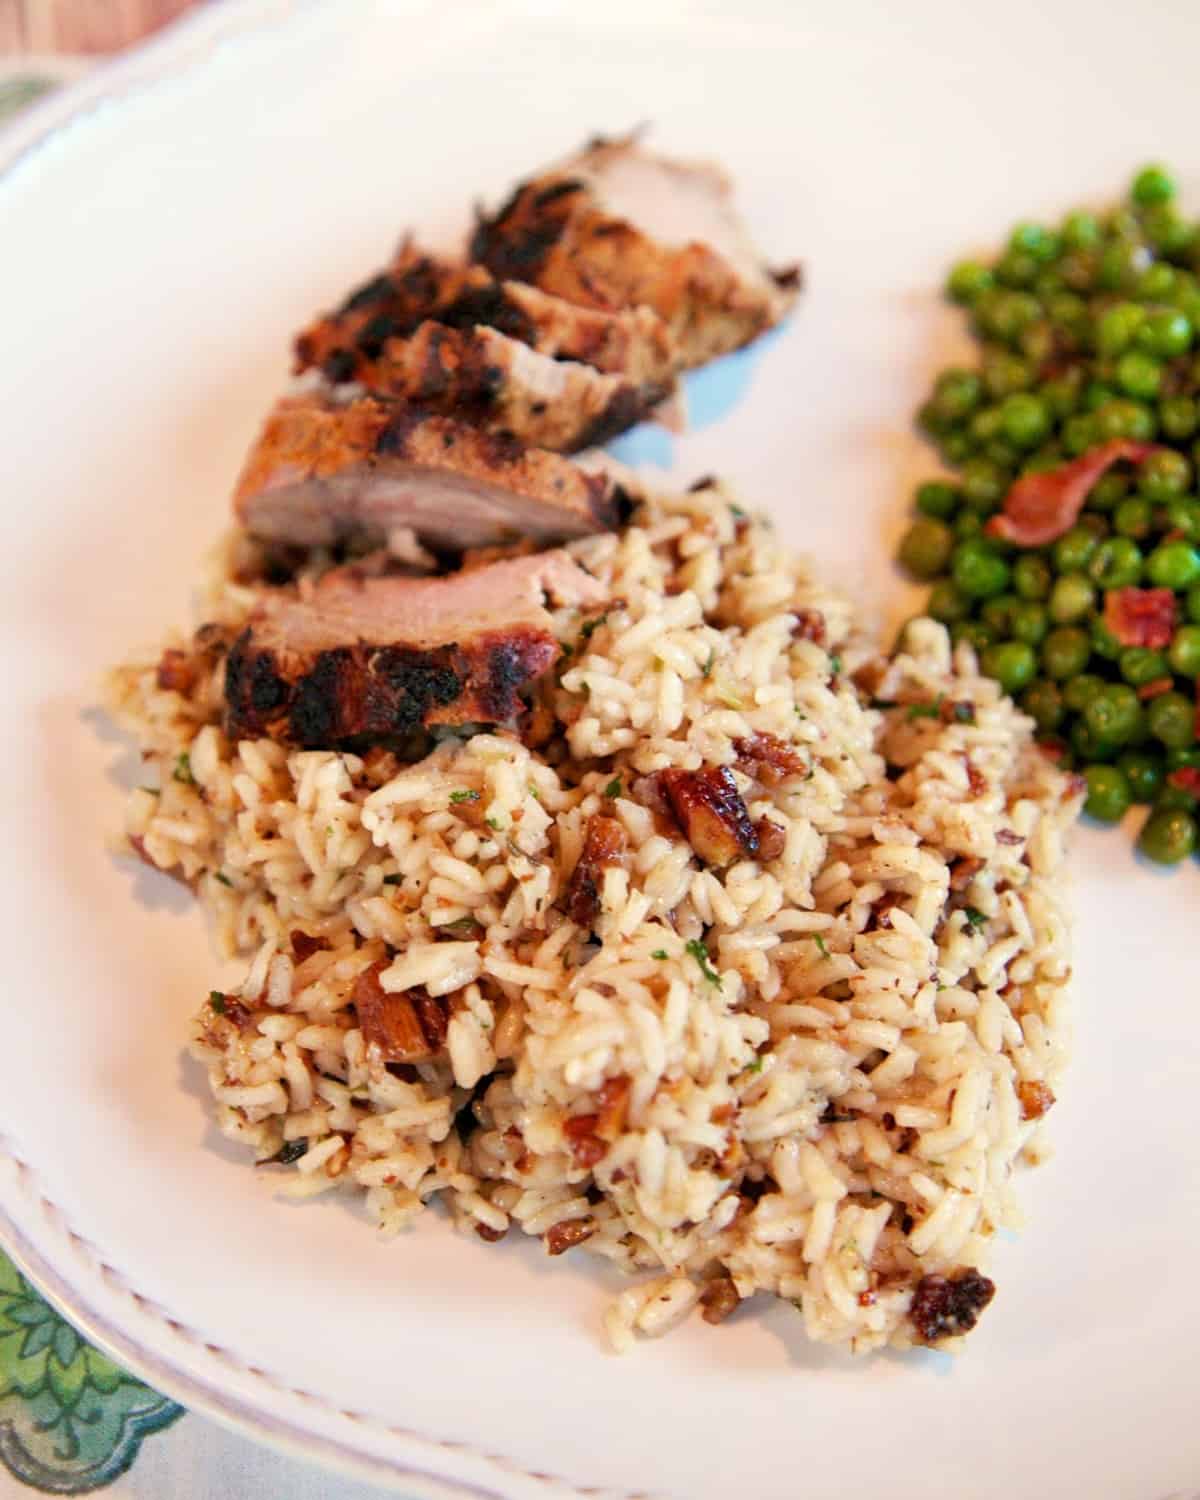 Pecan Pilaf recipe - toss the box and make this quick rice side dish - rice, pecans, chicken broth, and seasonings - tastes great and only takes 20 minutes!